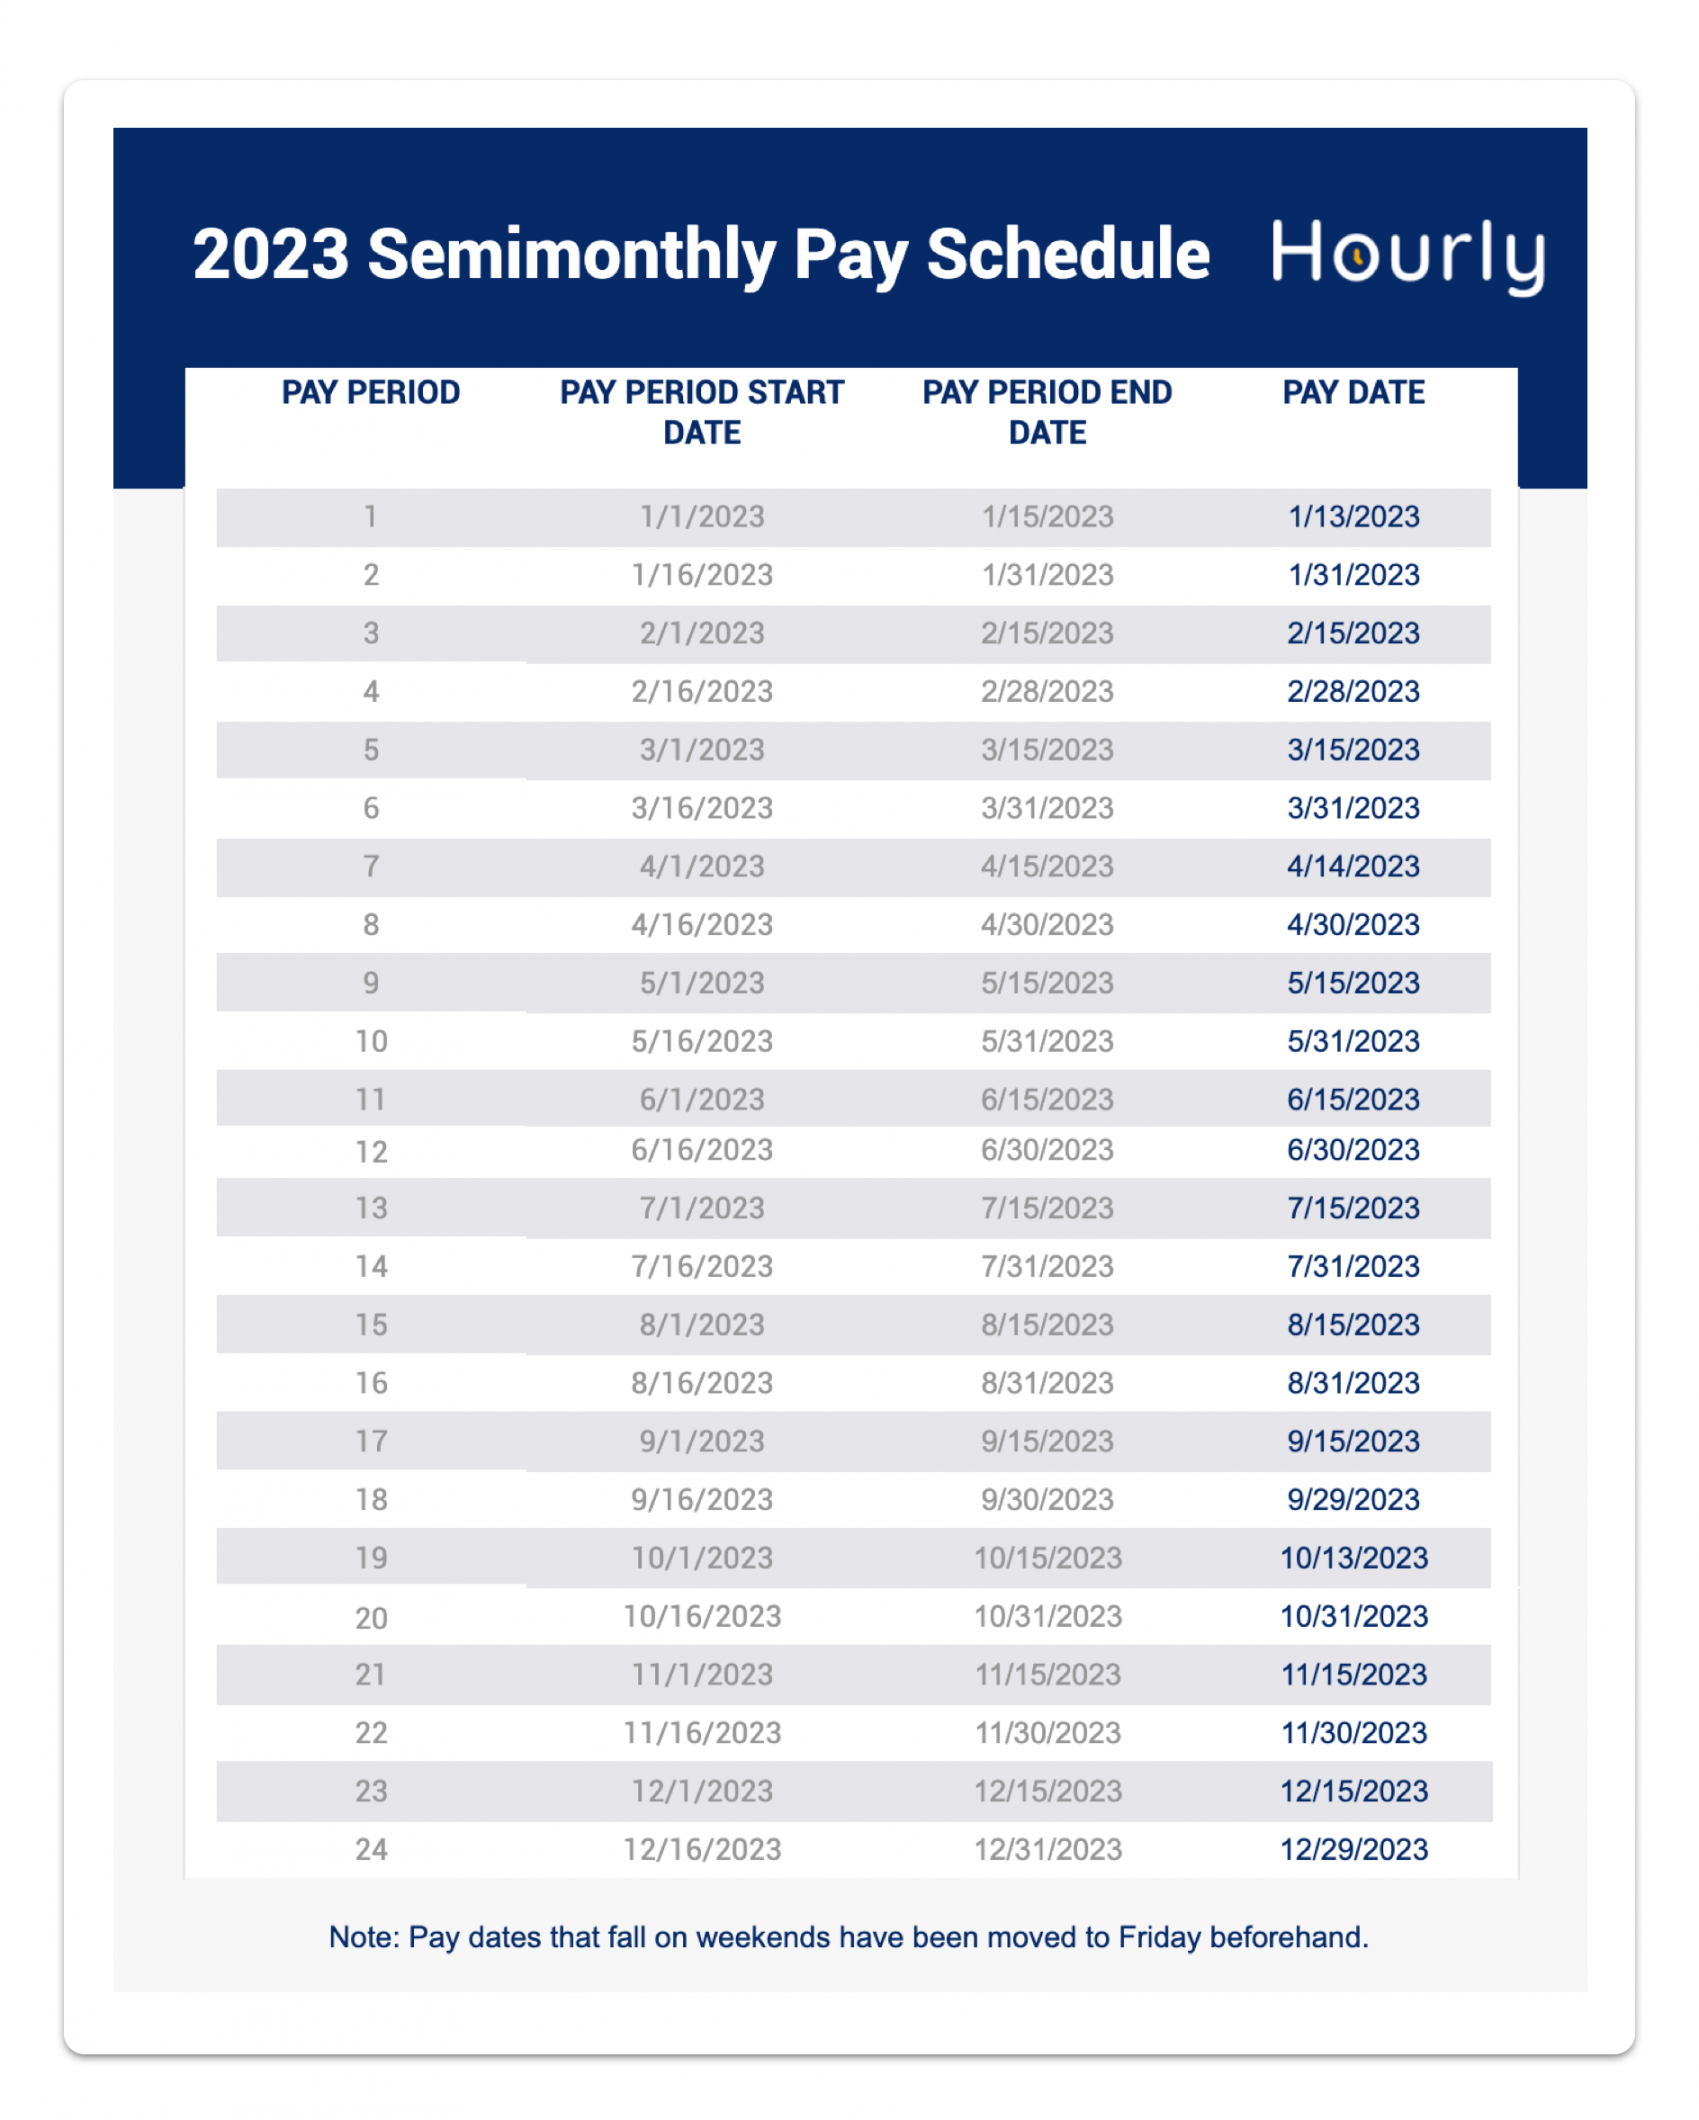 All You Need to Know about Pay Schedules + Templates - Hourly, Inc.